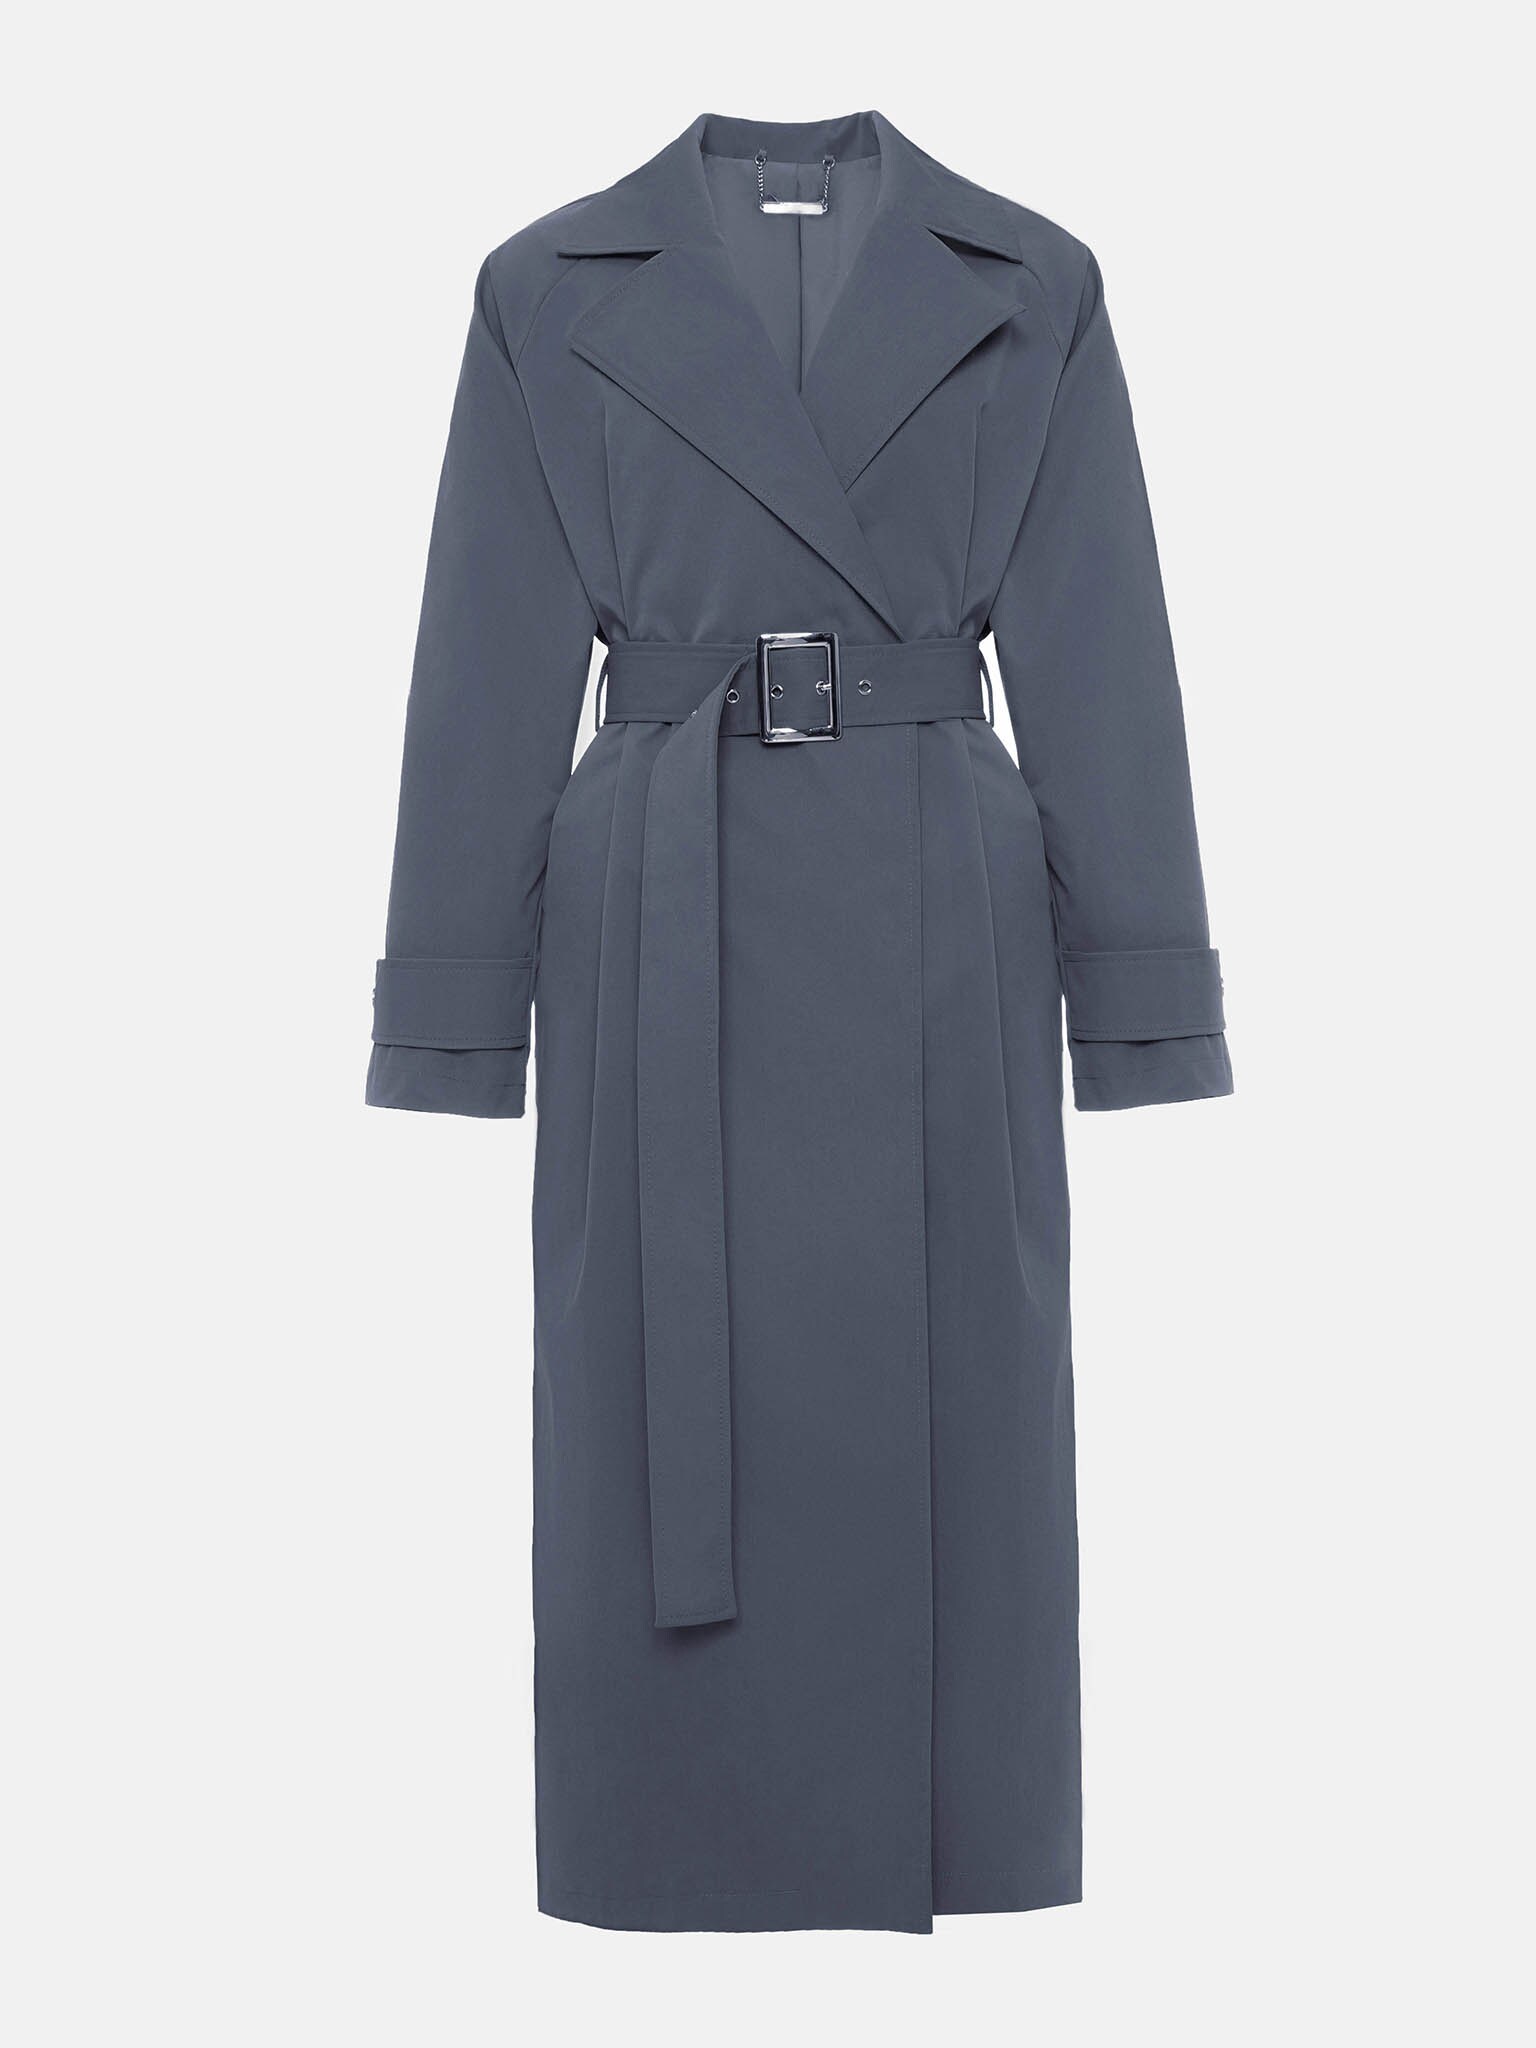 Oversized wide-lapel trench coat :: LICHI - Online fashion store